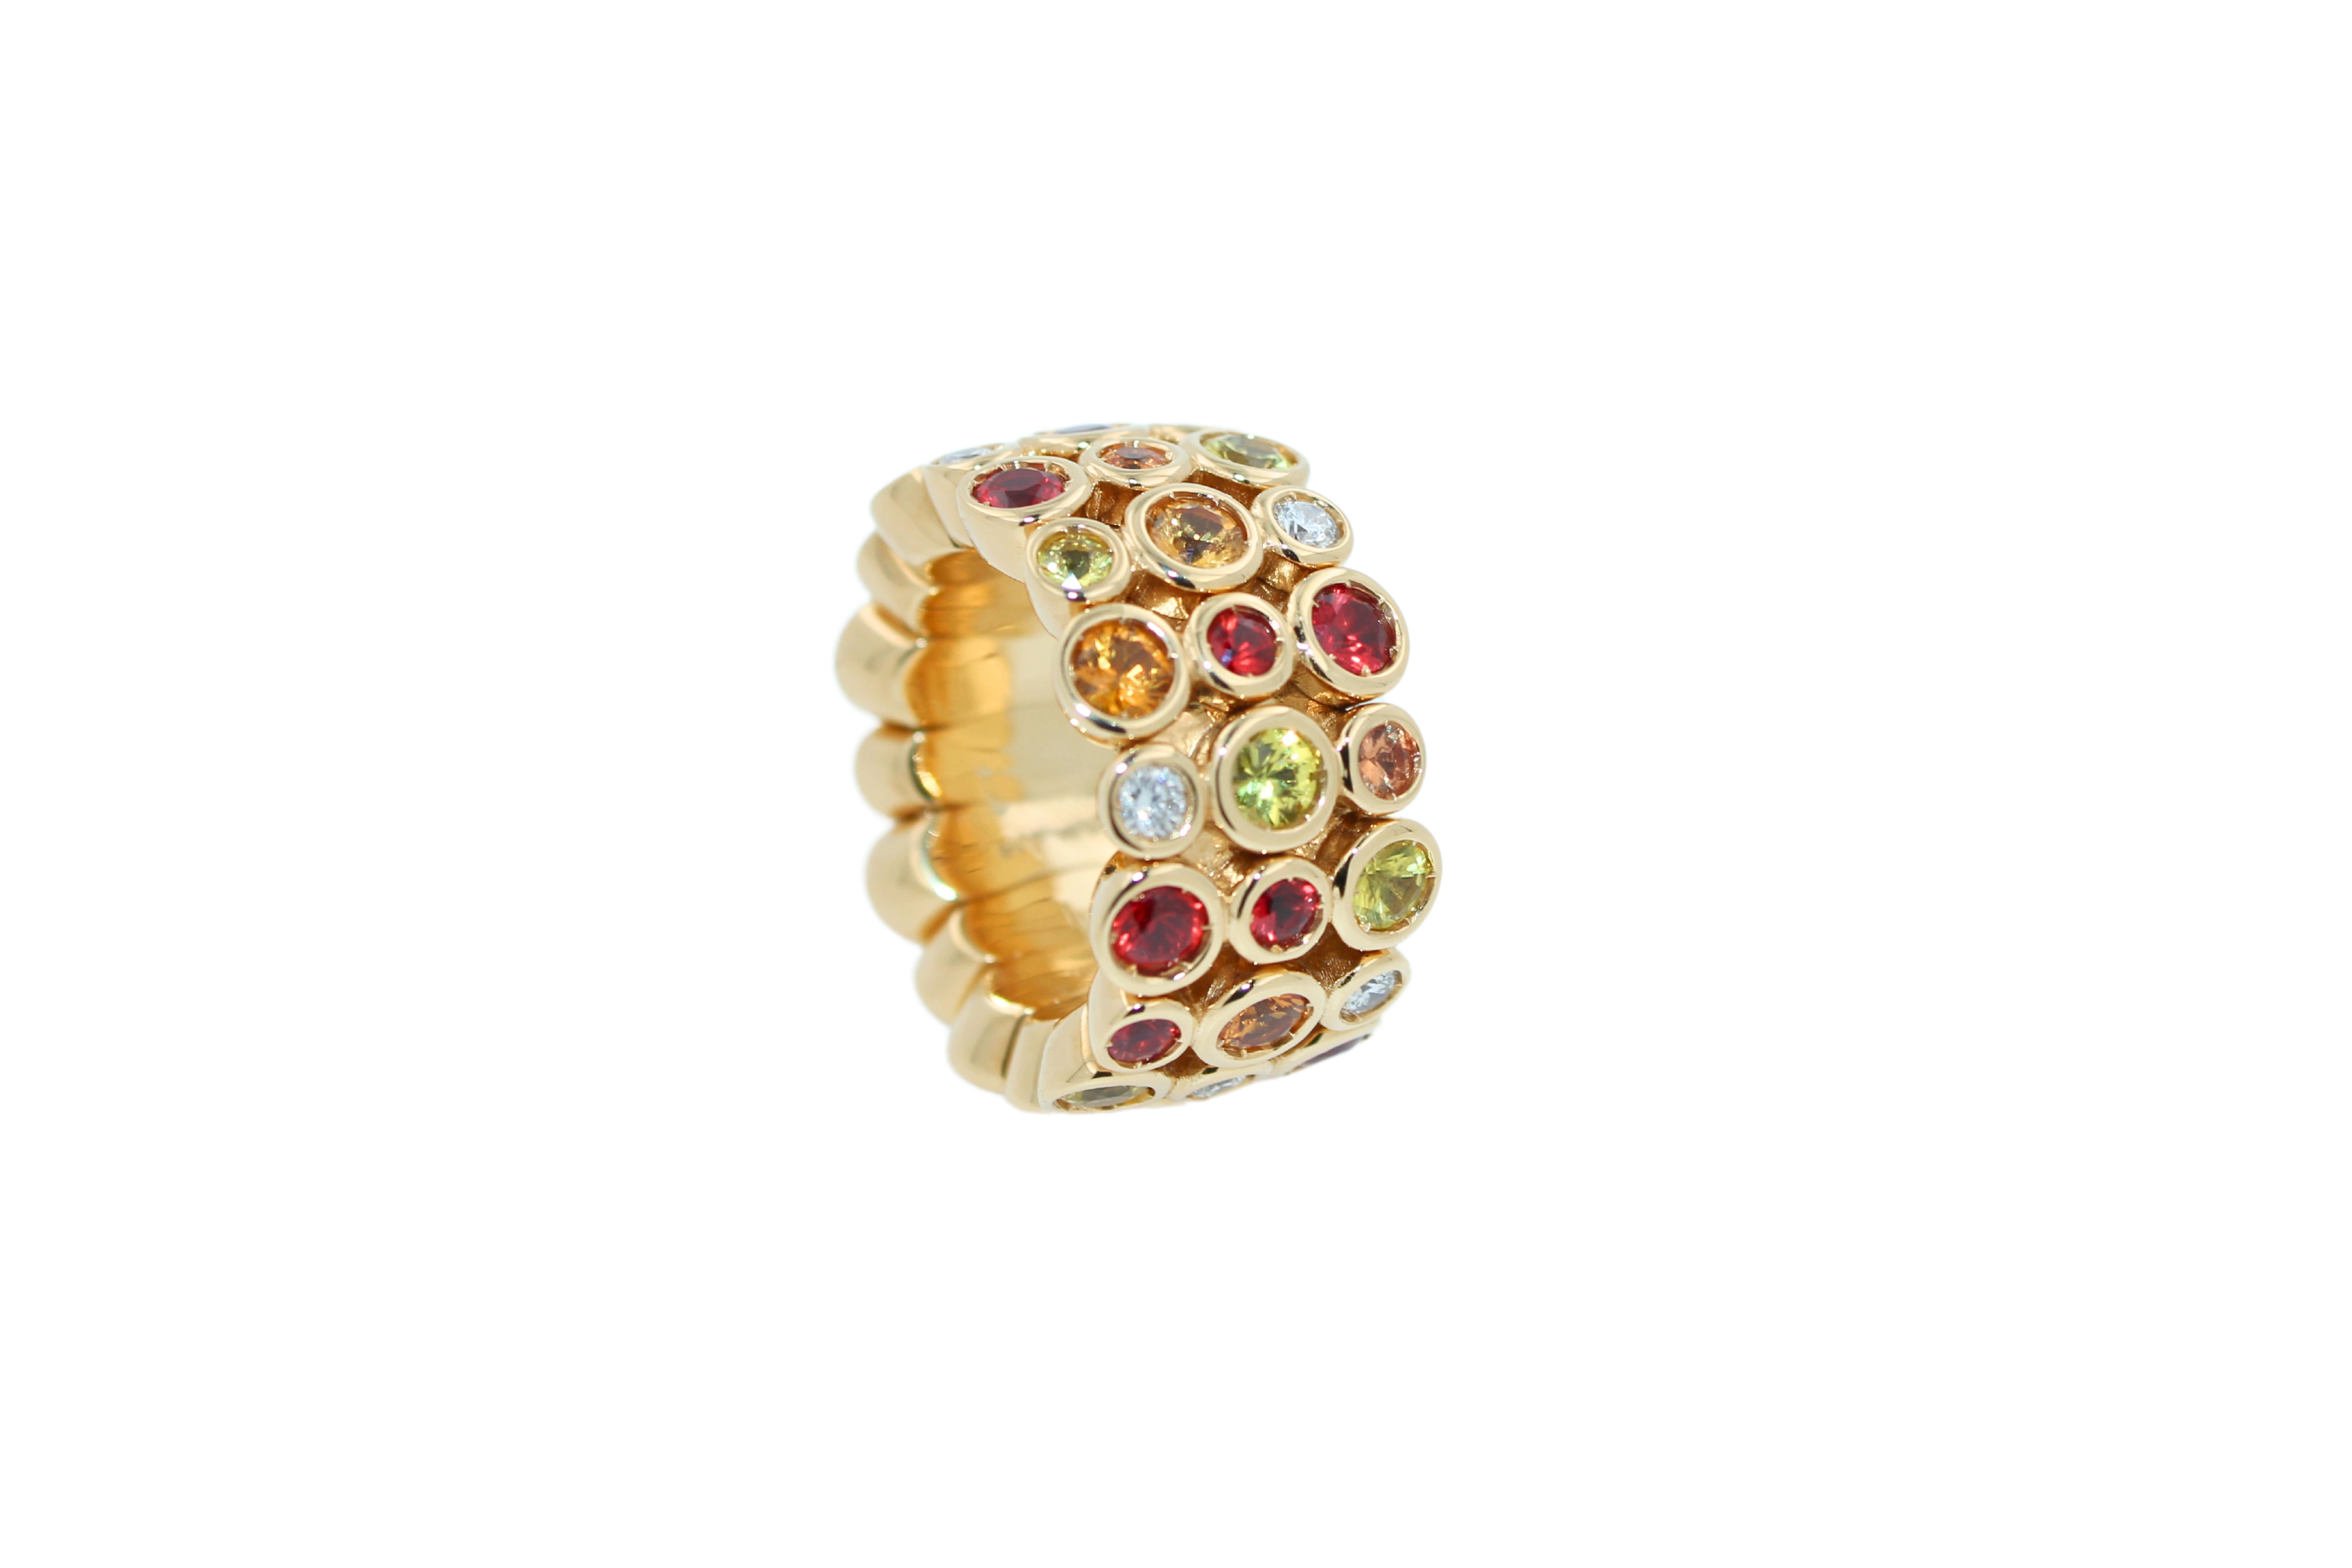 Modern Round Sapphires, Rubies & Diamonds Ring Set in 18K Yellow Gold For Sale 11